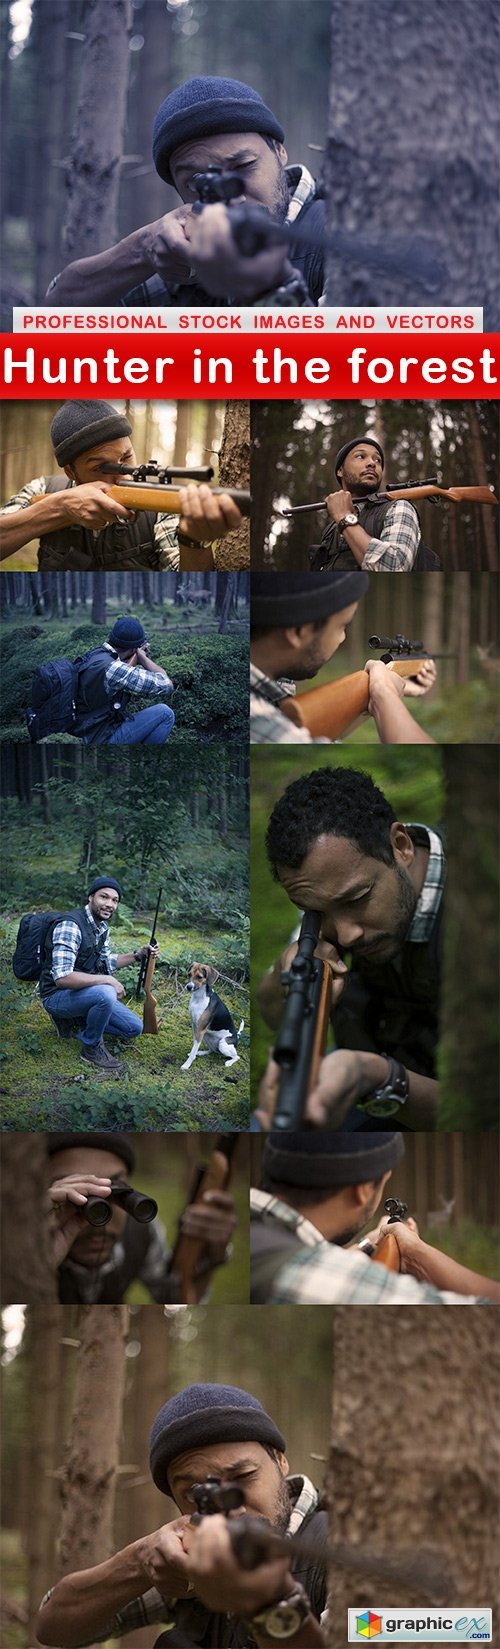 Hunter in the forest - 10 UHQ JPEG